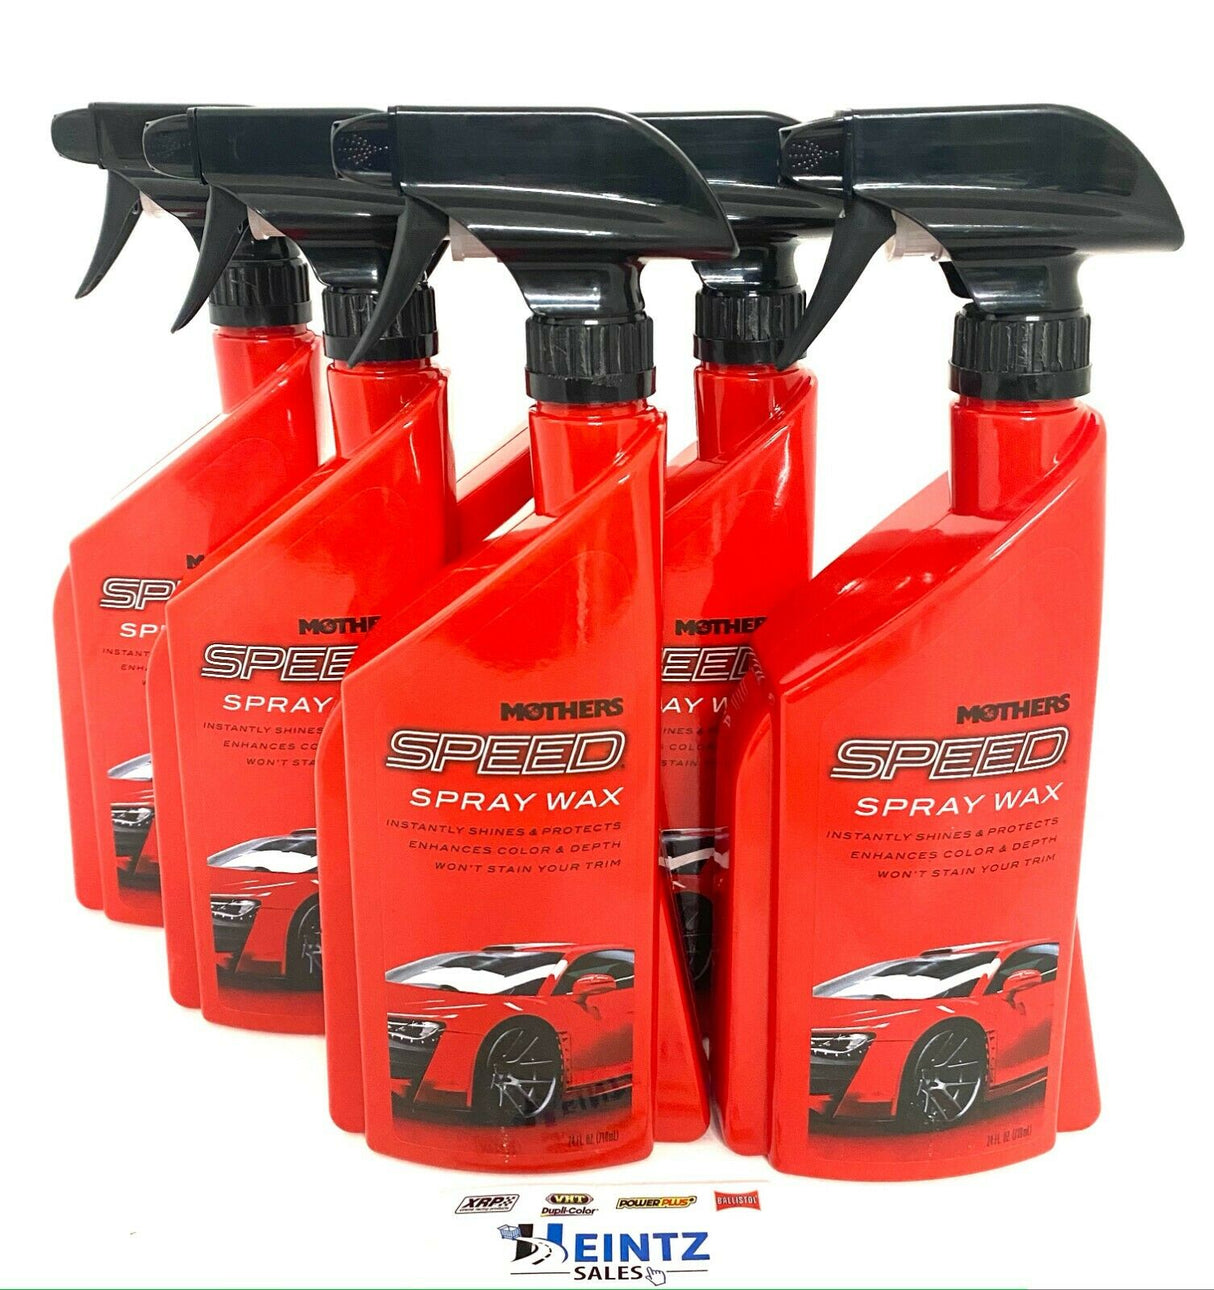 MOTHERS 15724 Speed Spray Wax 6 PACK - Shines & Protects - Color Enhancers - 24 fl. oz.